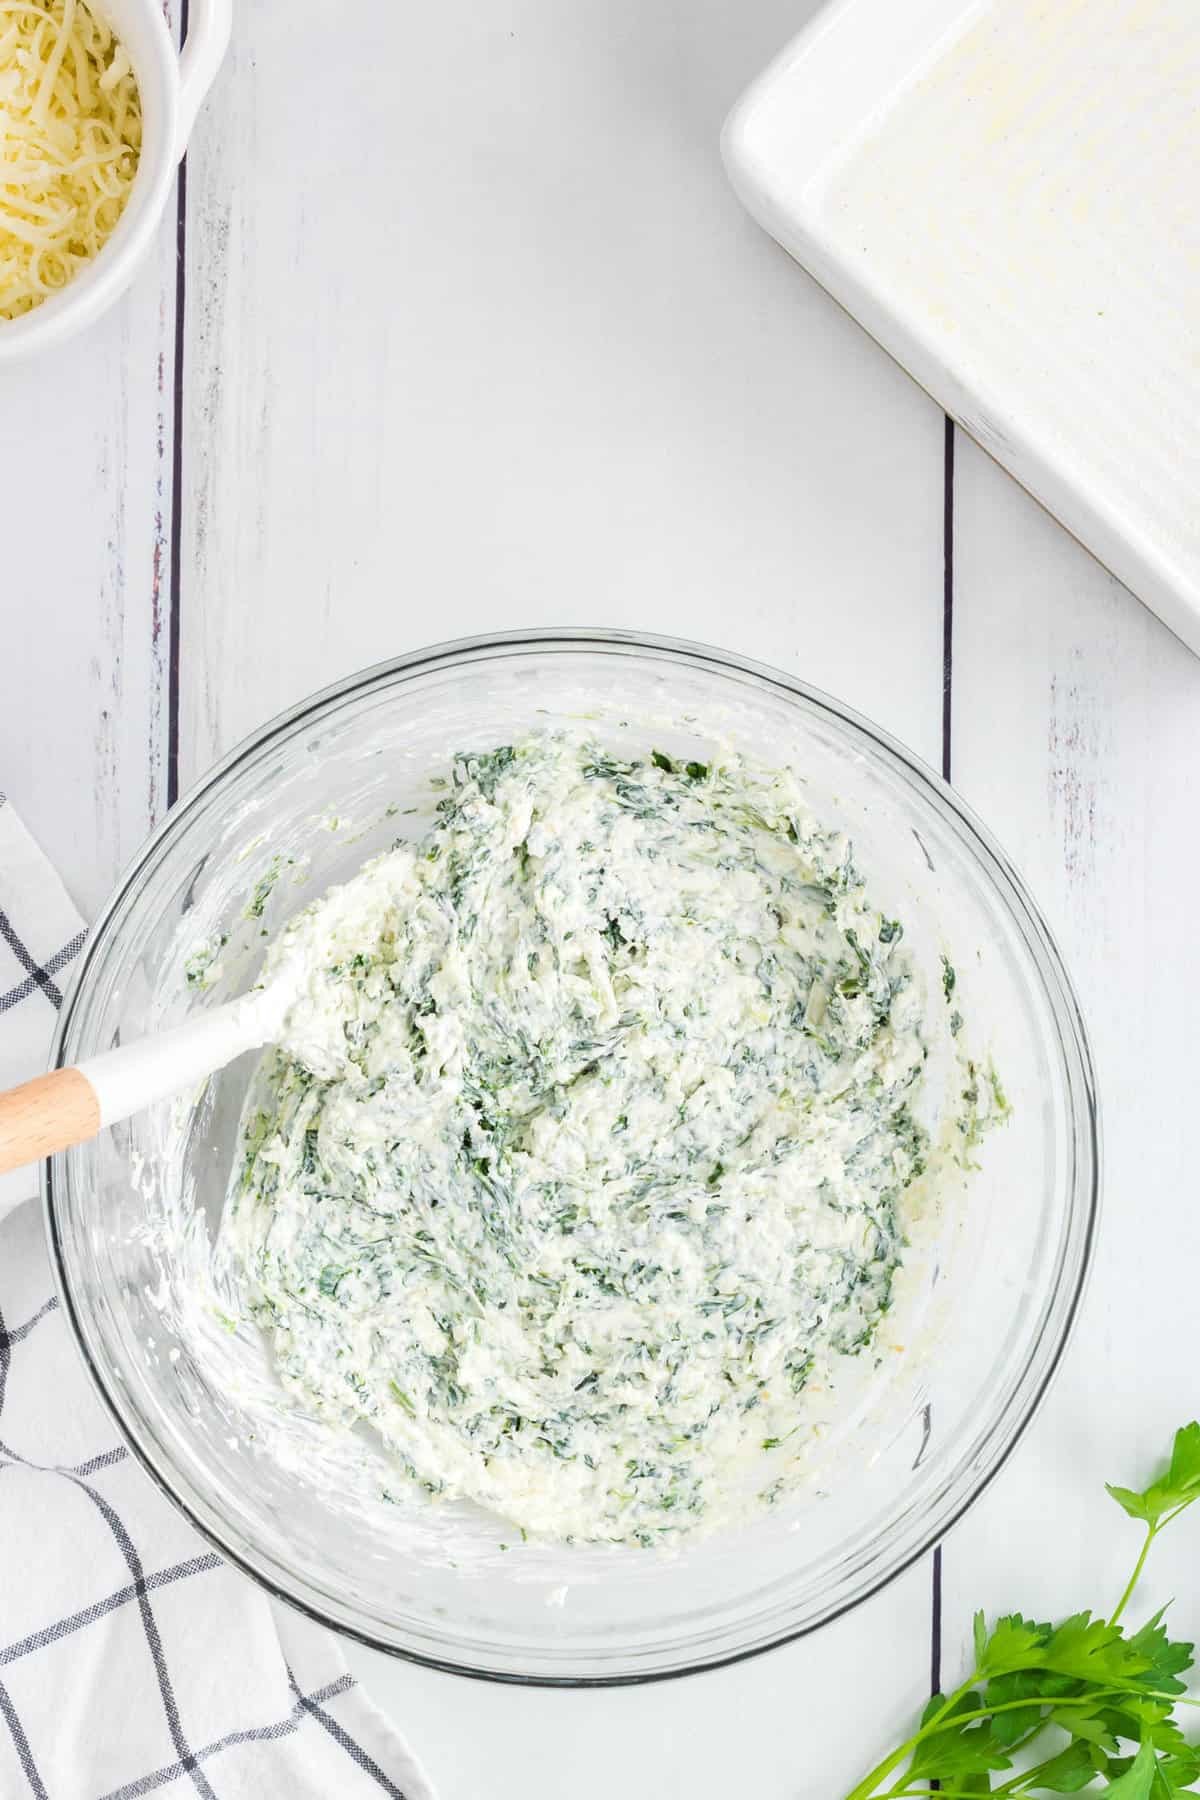 Blending Ingredients with Wooden Spoon in Mixing Bowl for Hot Spinach Dip Recipe